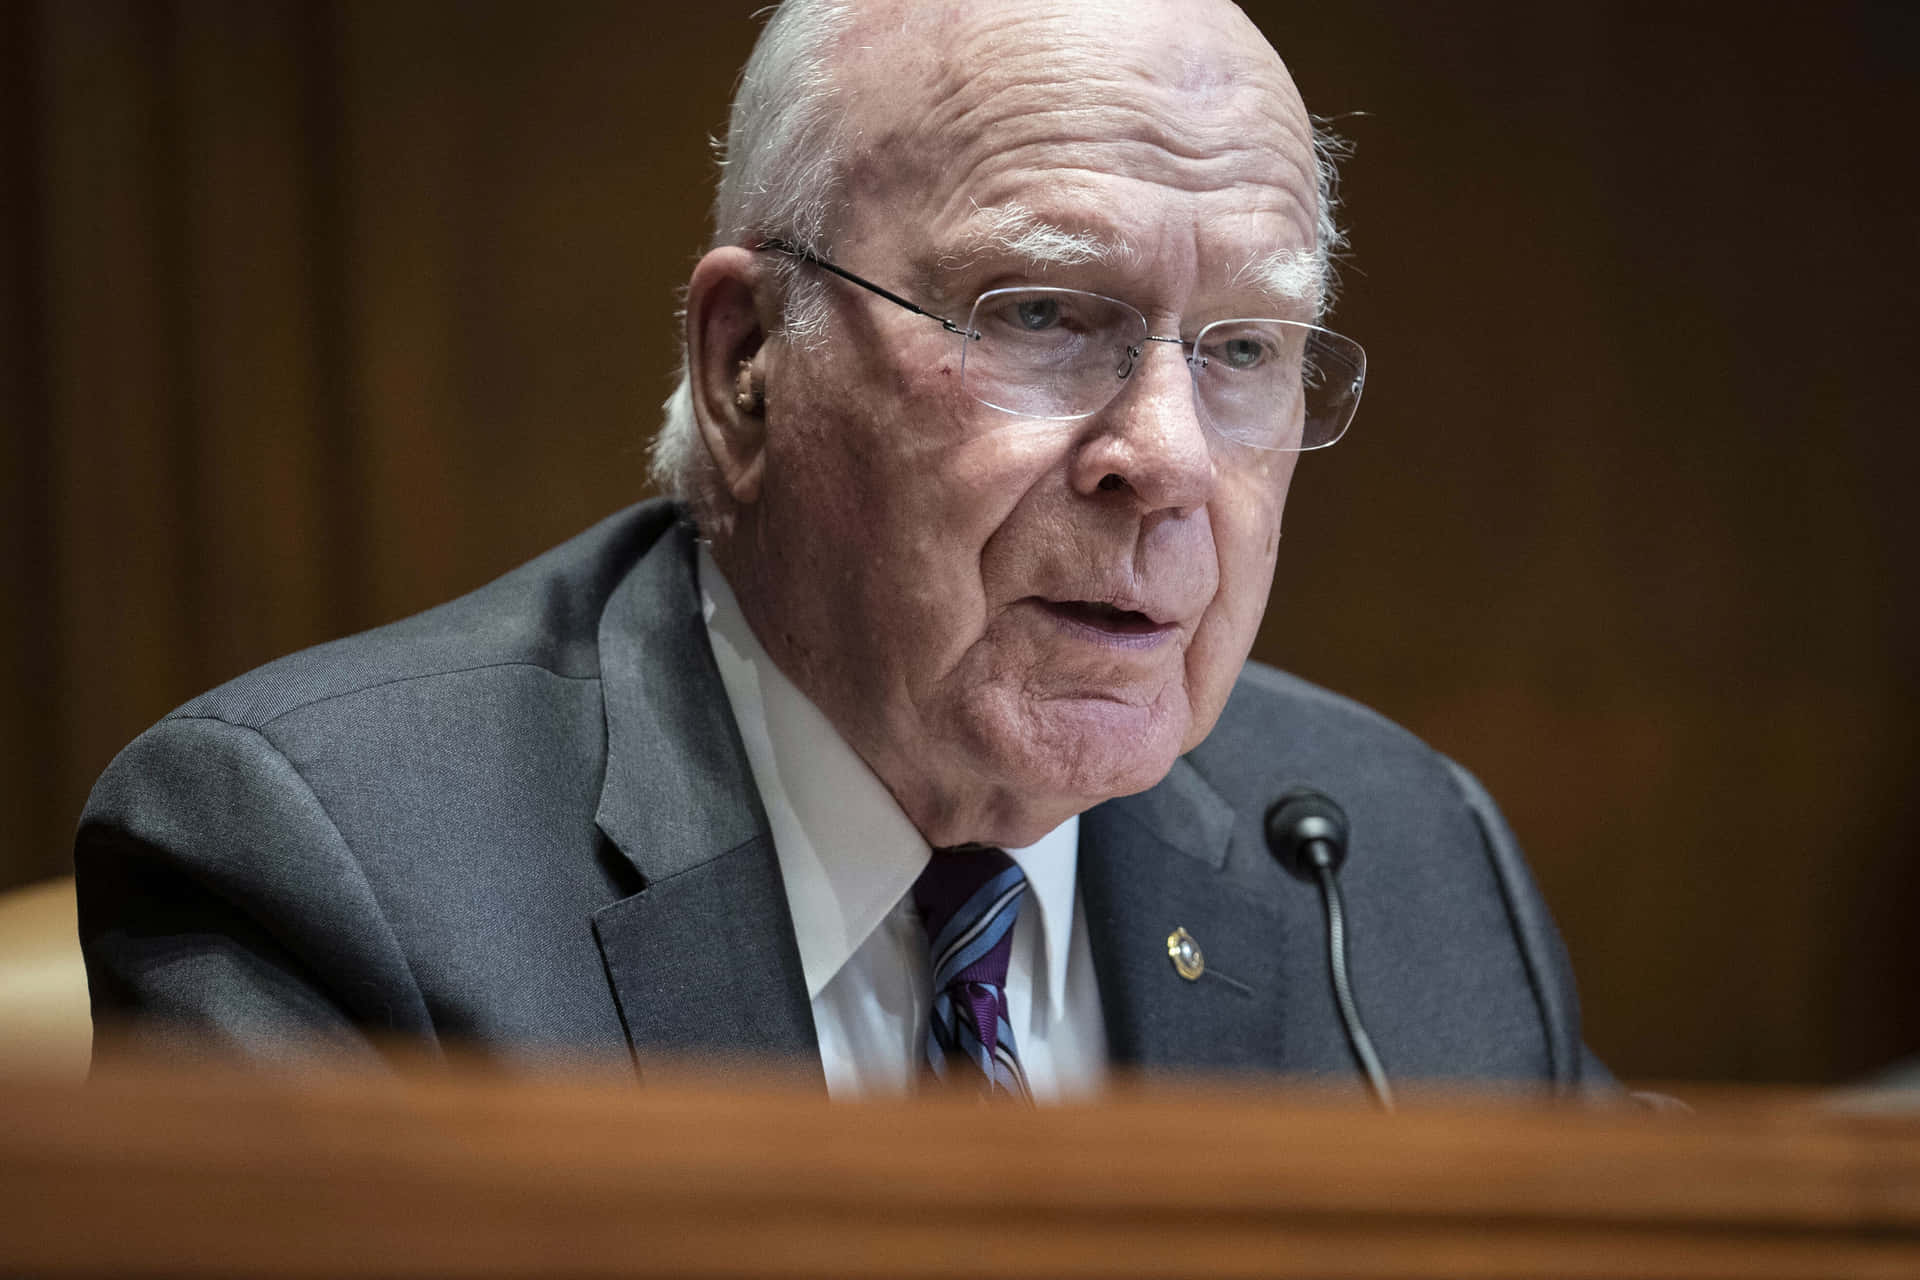 Influential Senator Patrick Leahy in thought mode Wallpaper